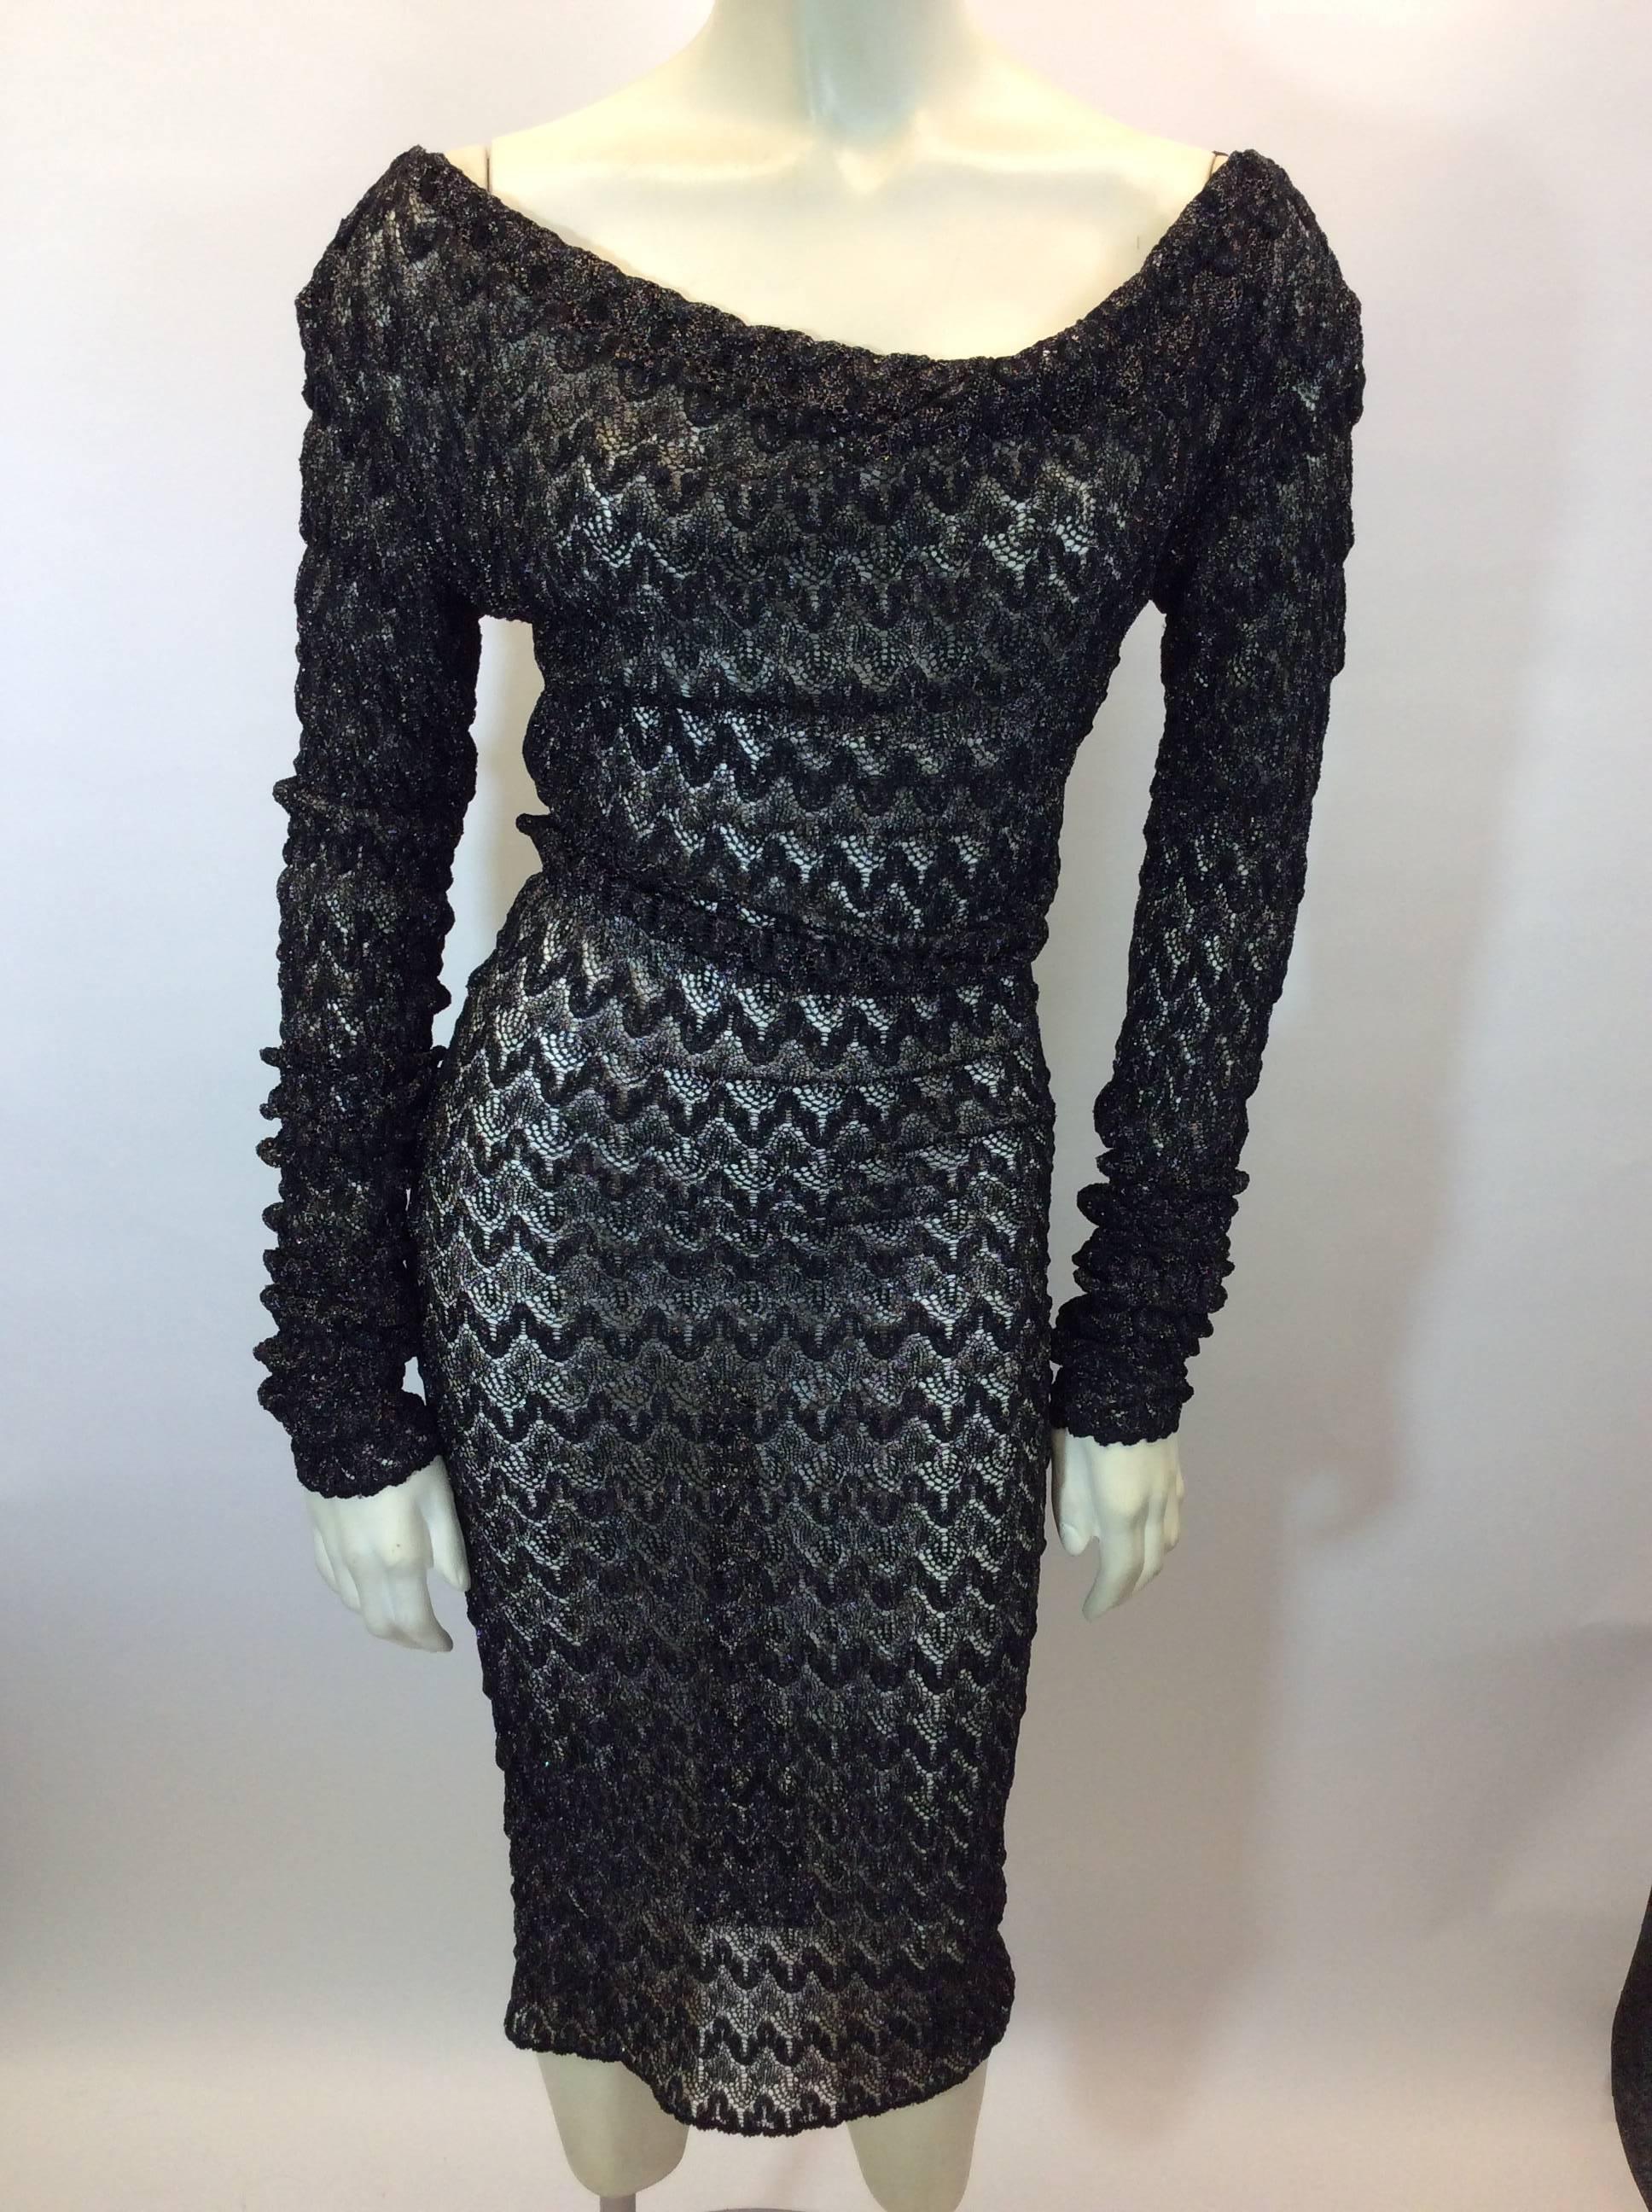 Black Metallic Lace Knit Stretch Dress
See through design
Can be worn on or off the shoulder
Knee length
Long sleeved
Size 40
Fiber content unknown